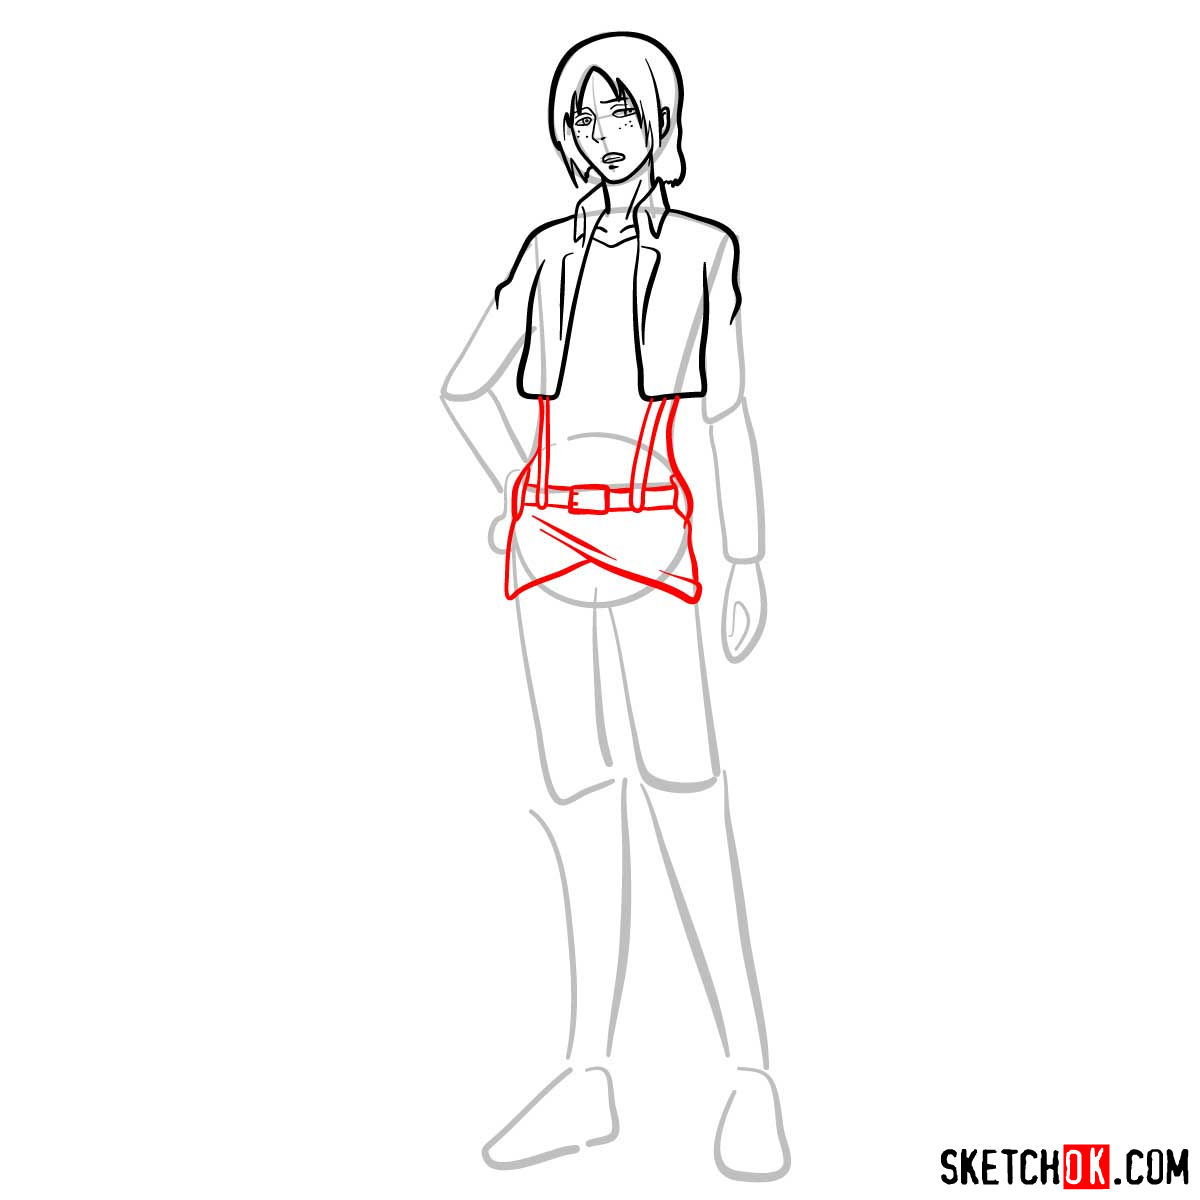 How to draw Ymir from Attack on Titan - step 08